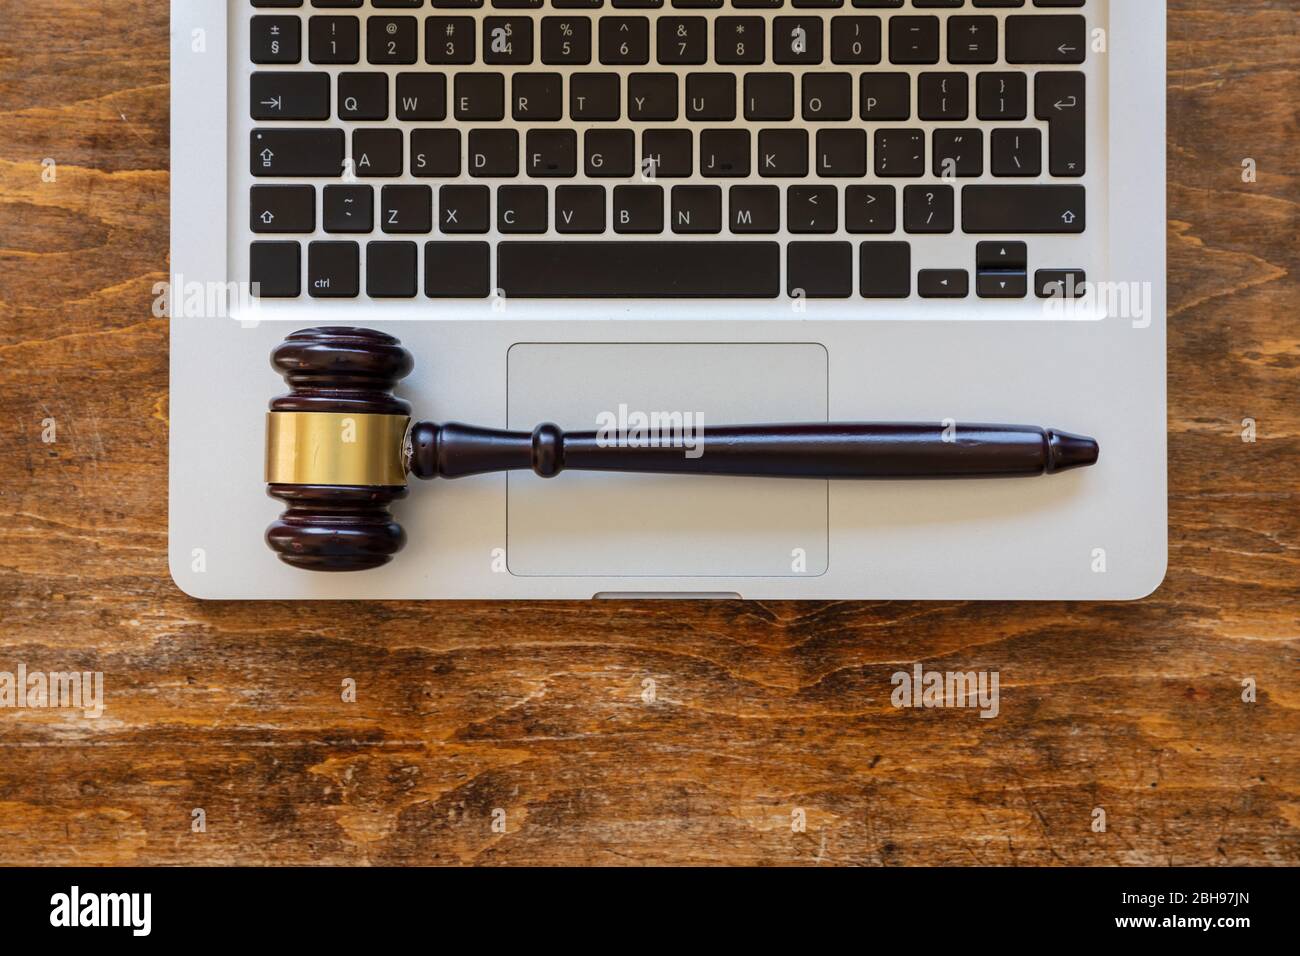 Auction judge gavel on a computer laptop, wooden office desk background, top view. Online auction, legal decisions concept Stock Photo